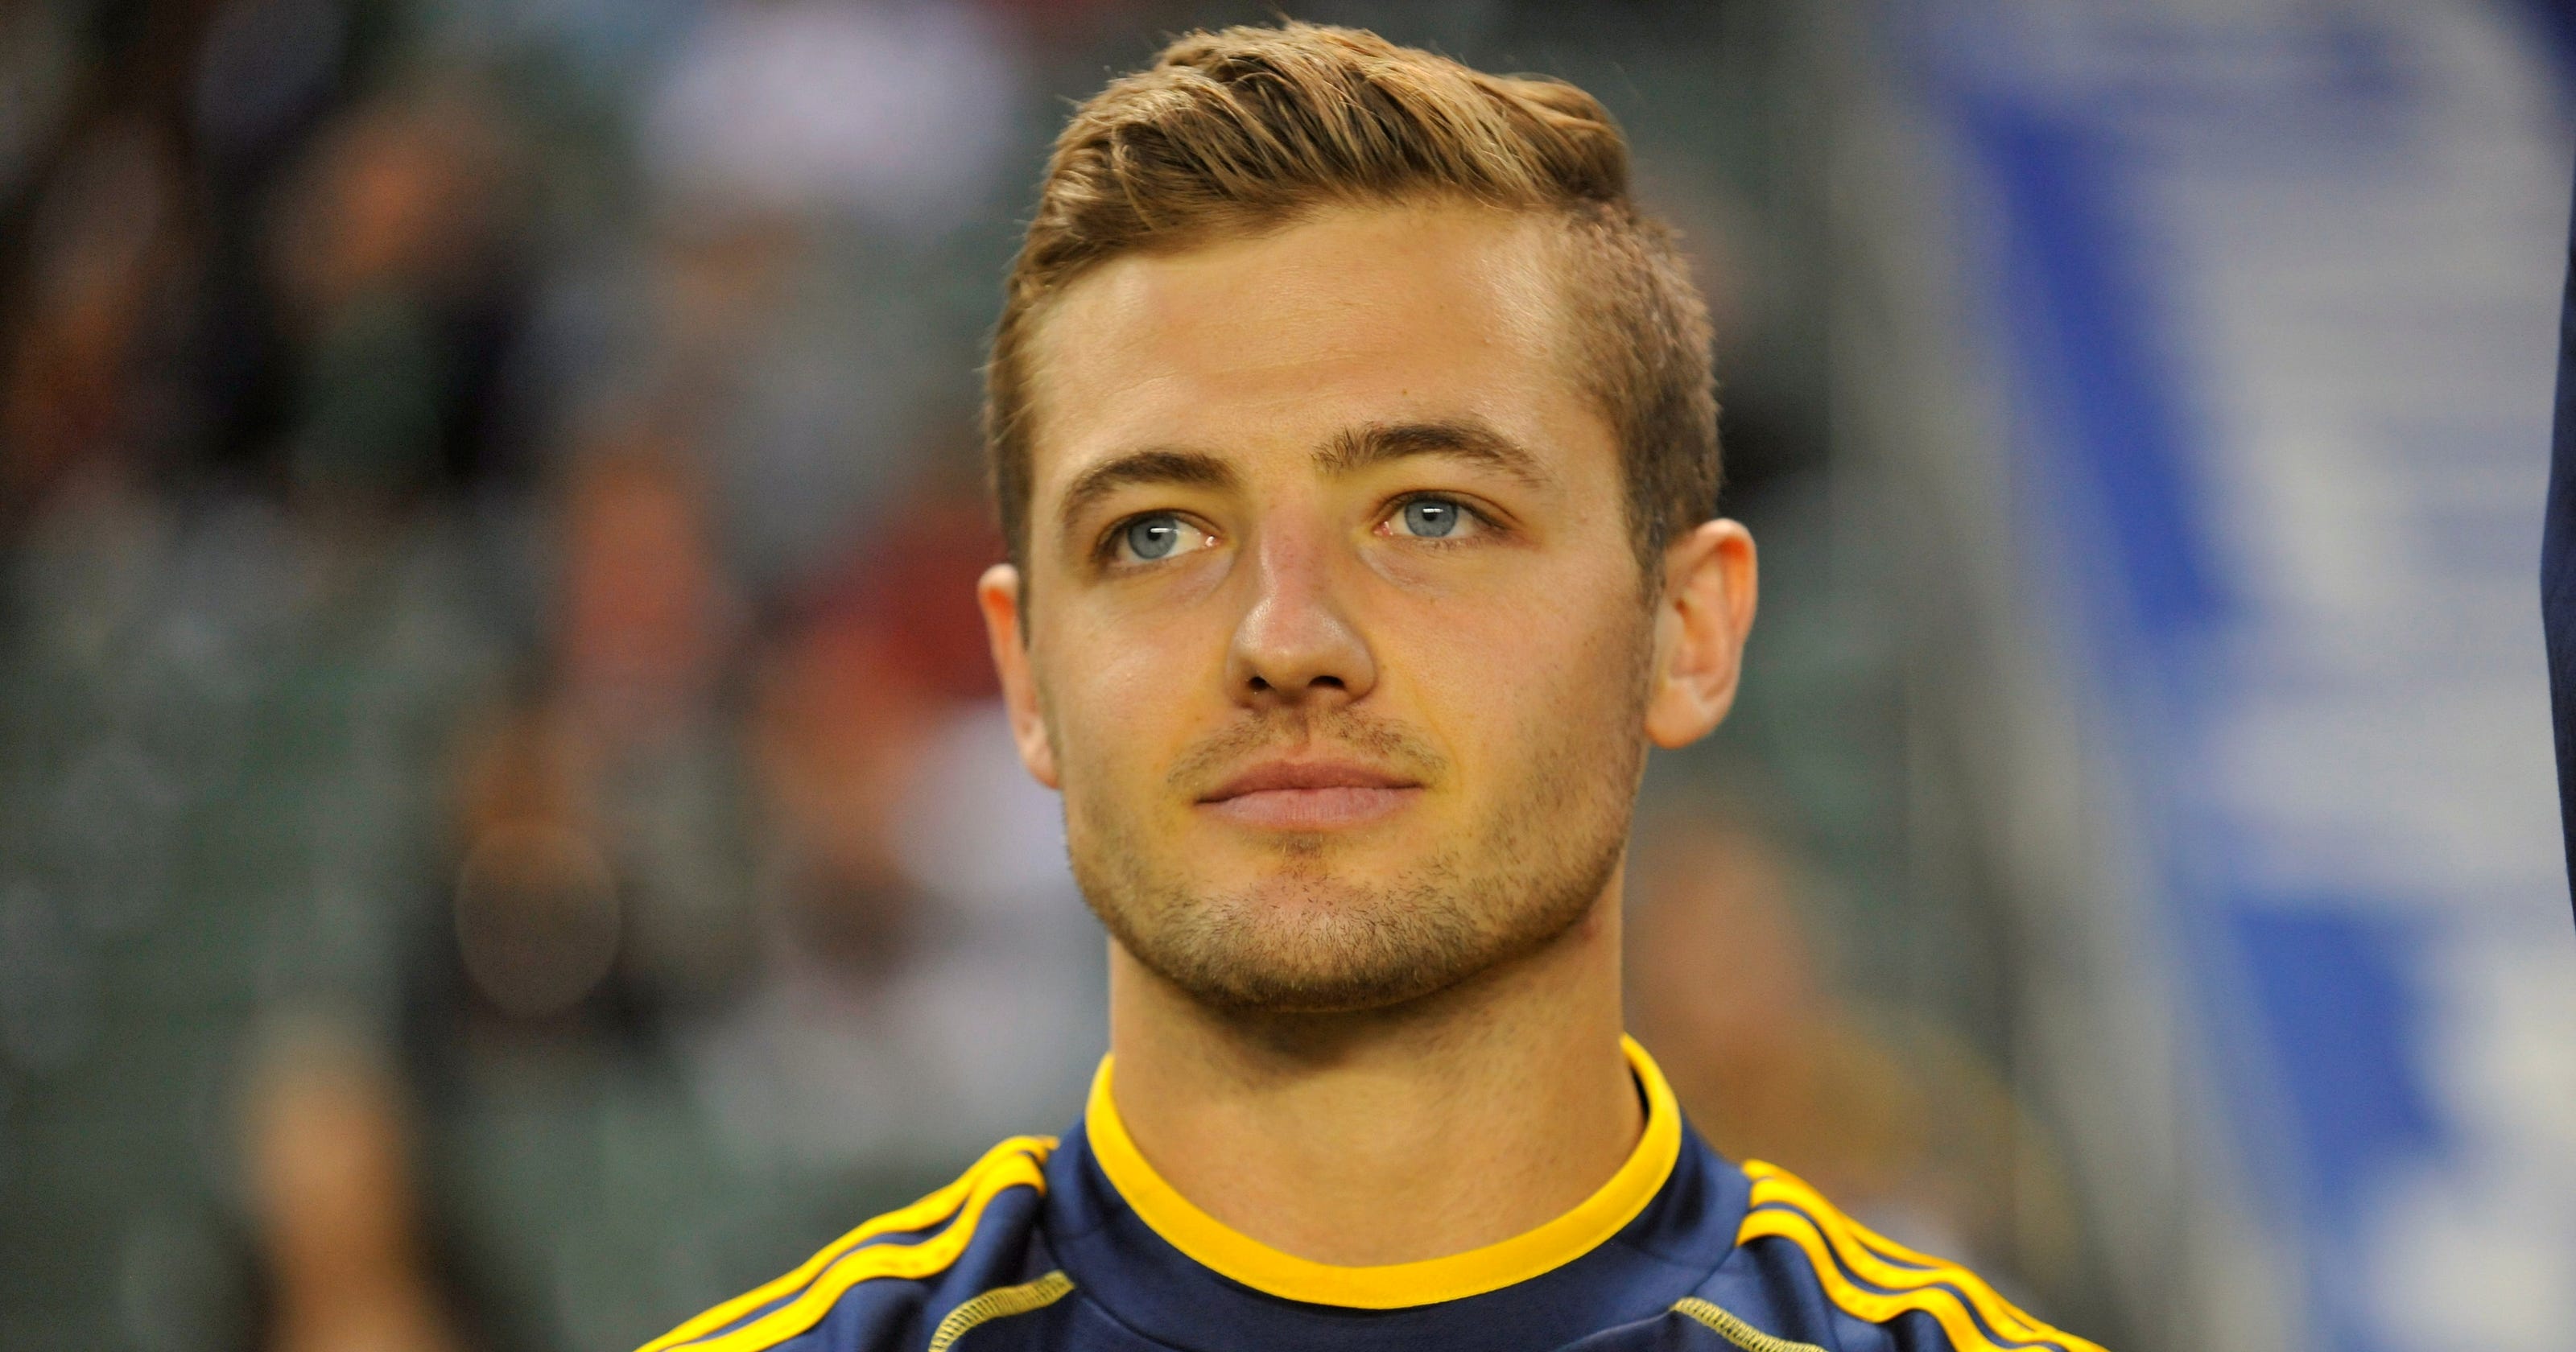 Robbie Rogers makes history as MLS' first openly gay player